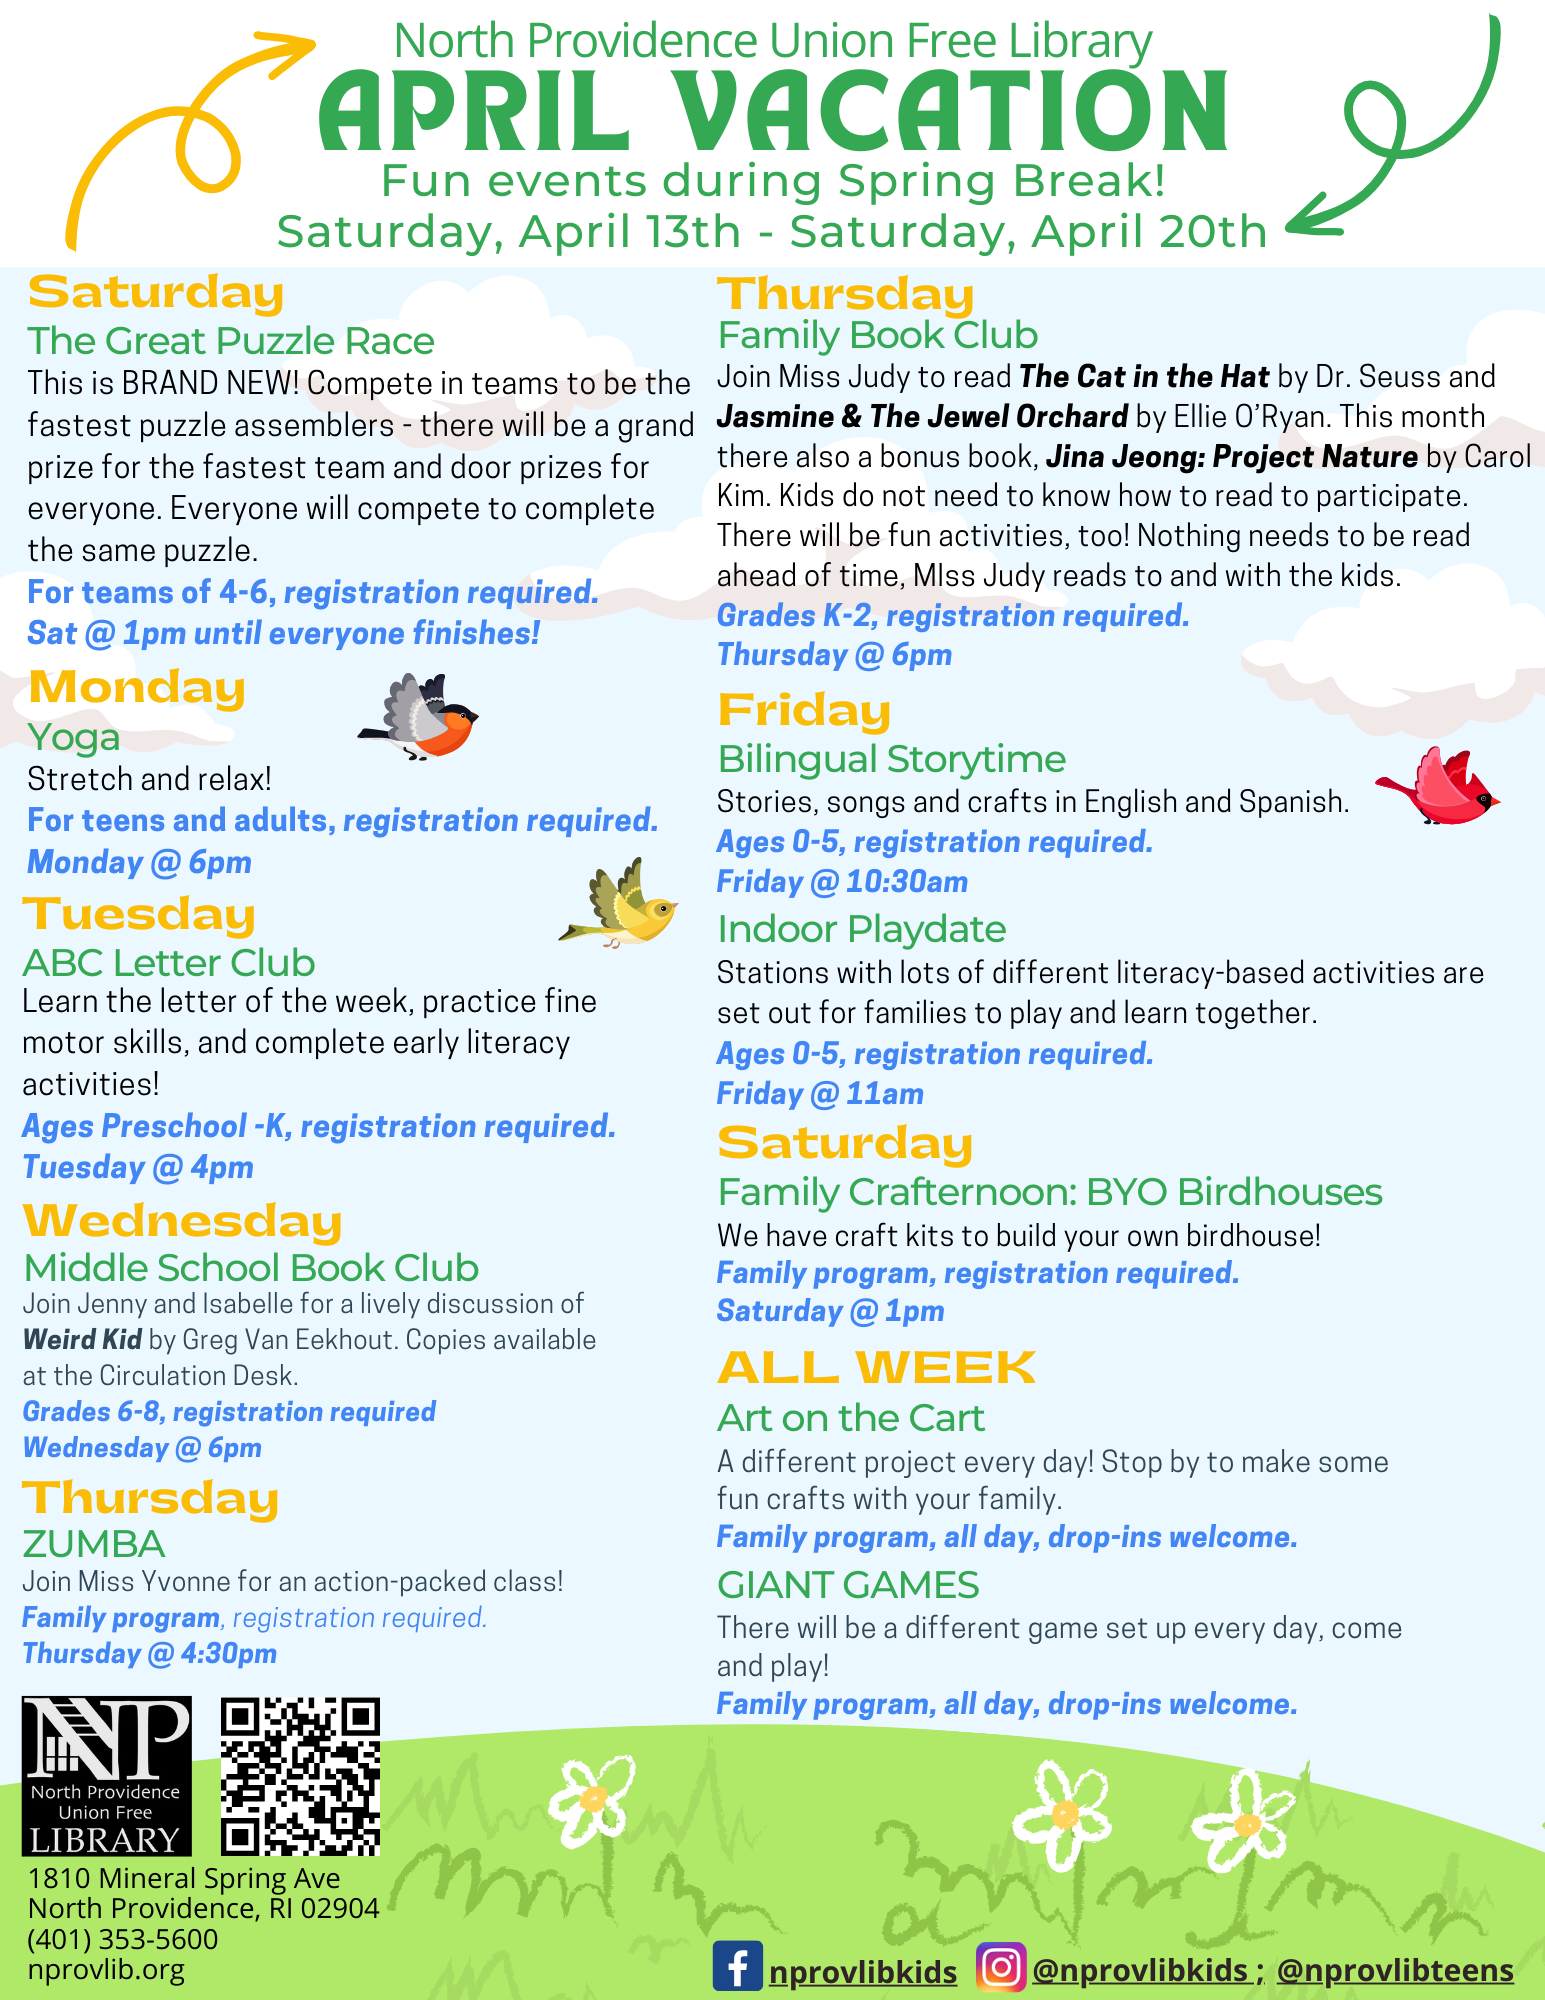 Flyer for April Vacation Week programs